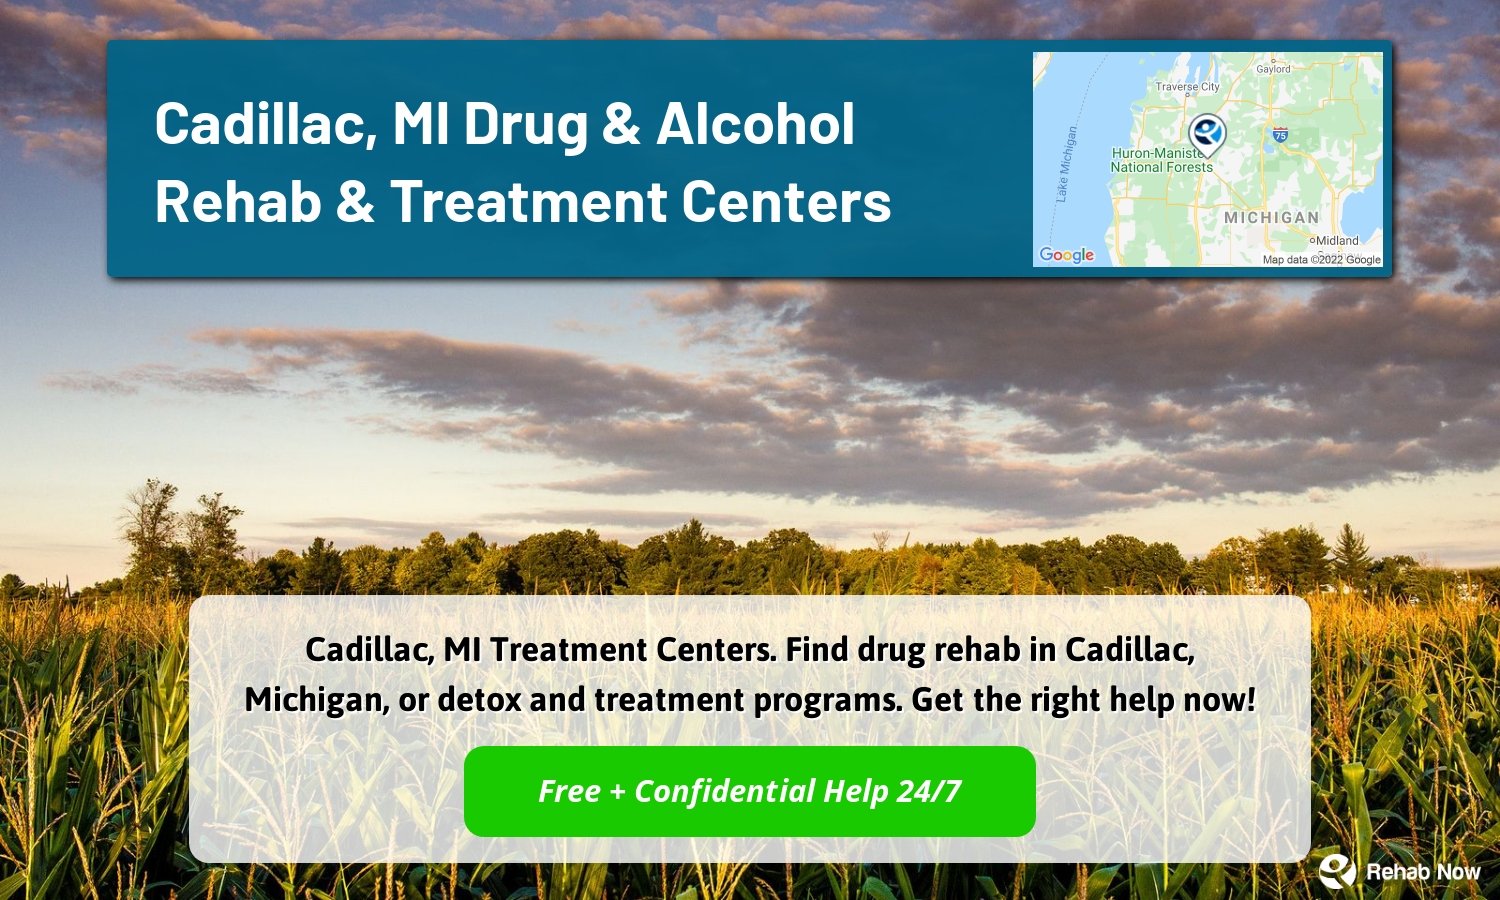 Cadillac, MI Treatment Centers. Find drug rehab in Cadillac, Michigan, or detox and treatment programs. Get the right help now!